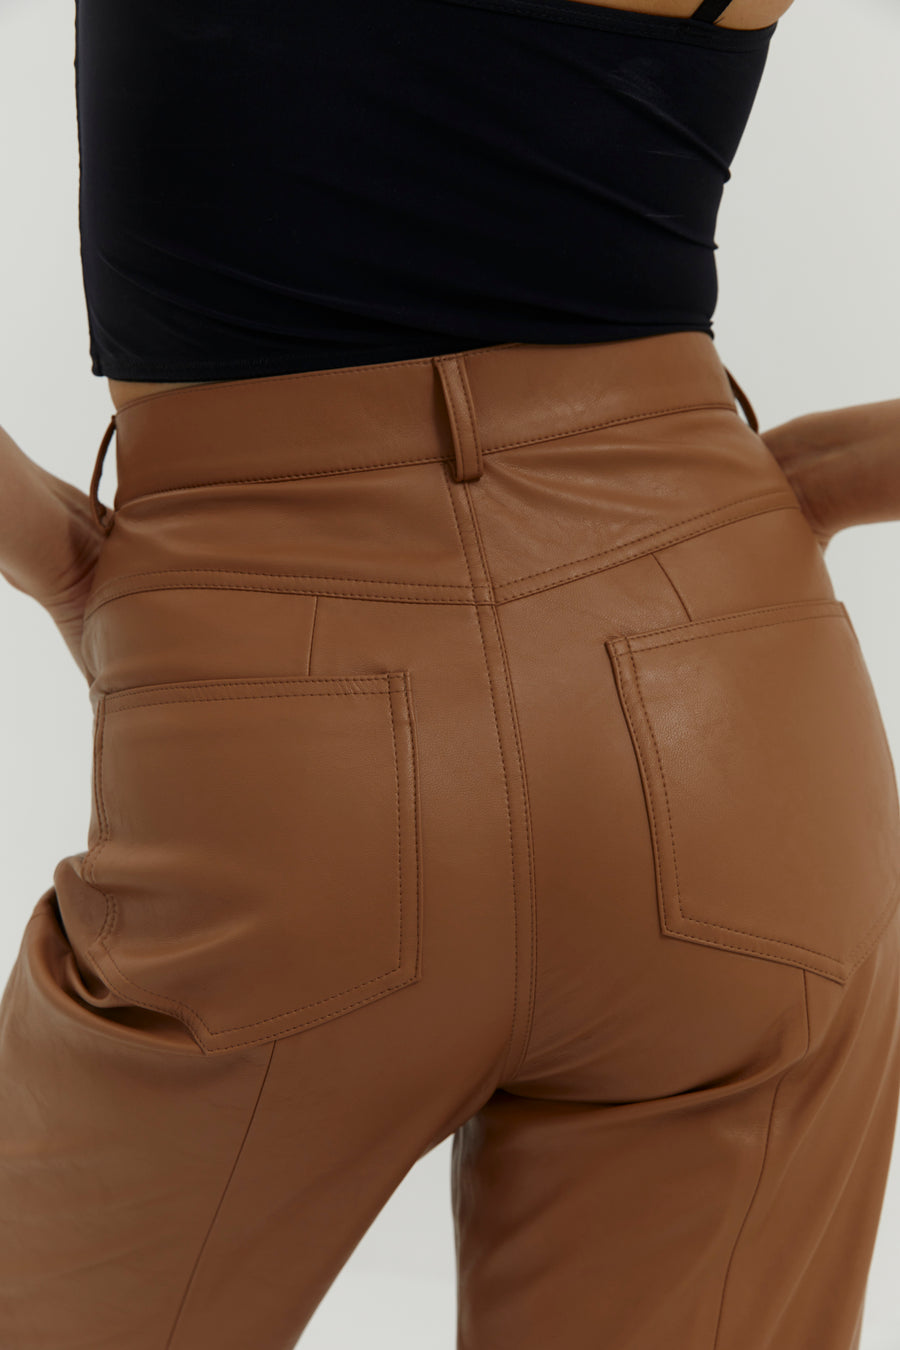 Eco Leather Trouser in Caramel